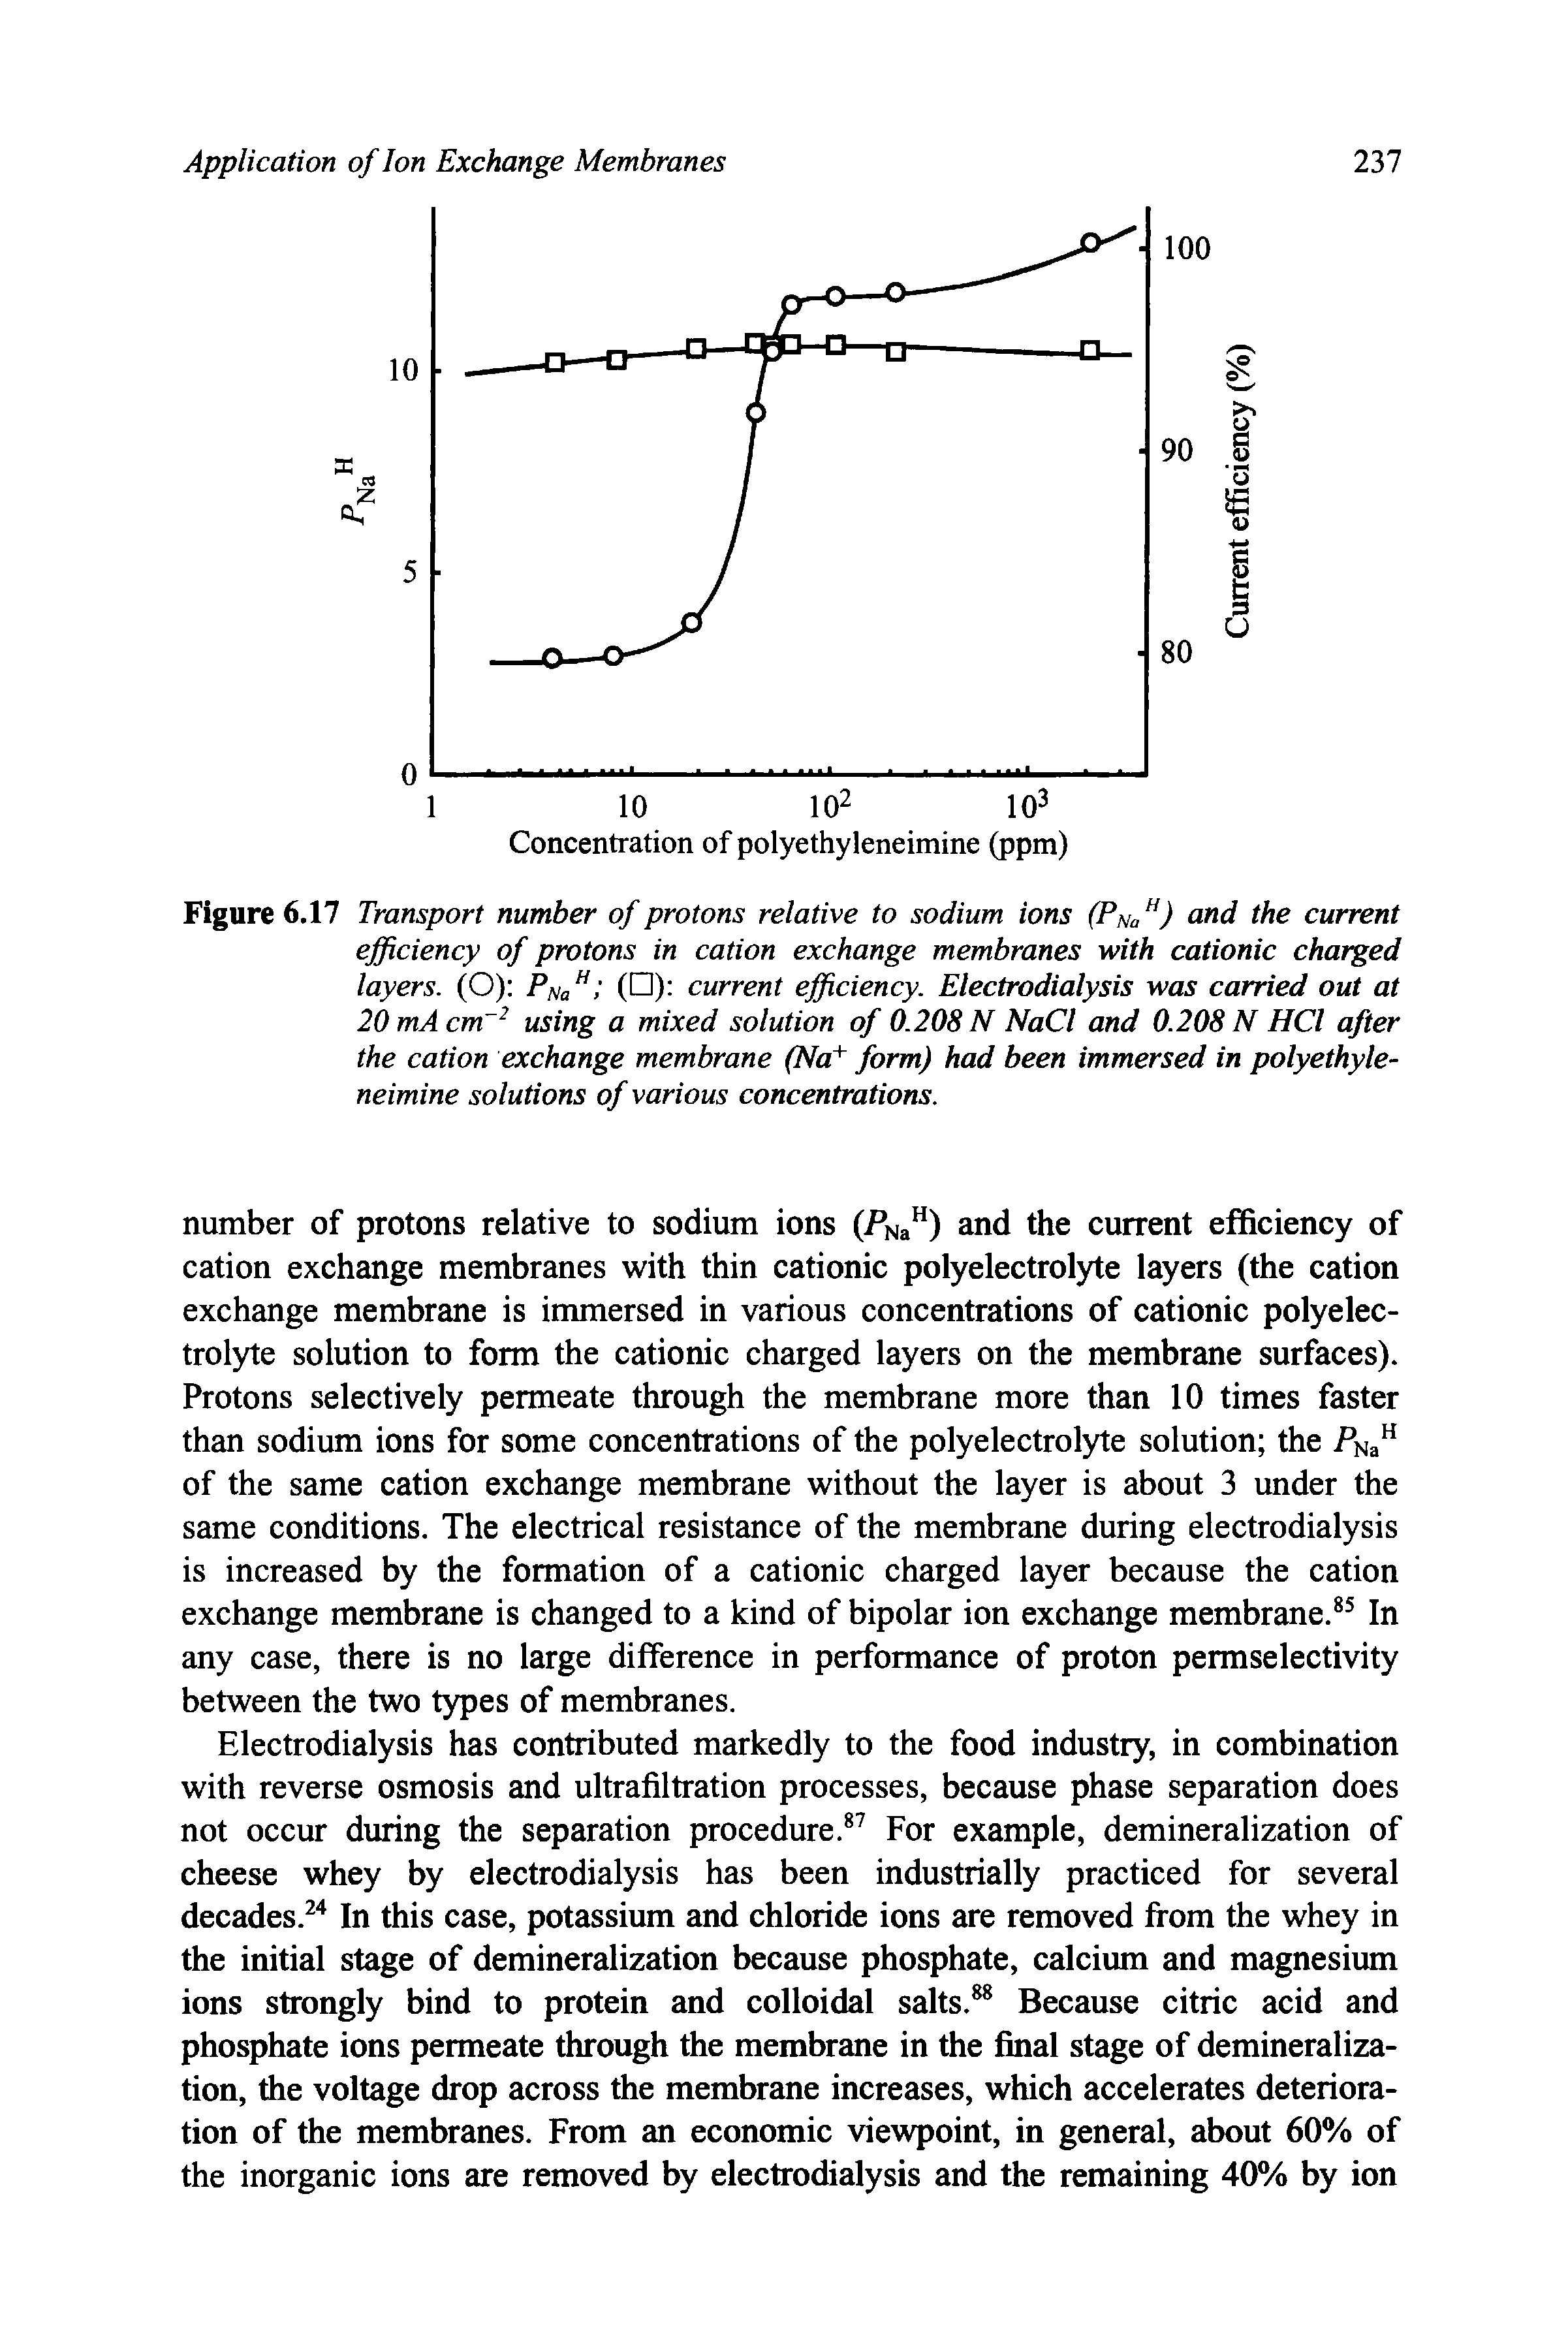 Figure 6.17 Transport number of protons relative to sodium ions (PNaH) and the current efficiency of protons in cation exchange membranes with cationic charged layers. (O) PnaH ( ) current efficiency. Electrodialysis was carried out at 20mAcmr2 using a mixed solution of 0.208 N NaCl and 0.208 N HCl after the cation exchange membrane (Na+ form) had been immersed in polyethyle-neimine solutions of various concentrations.